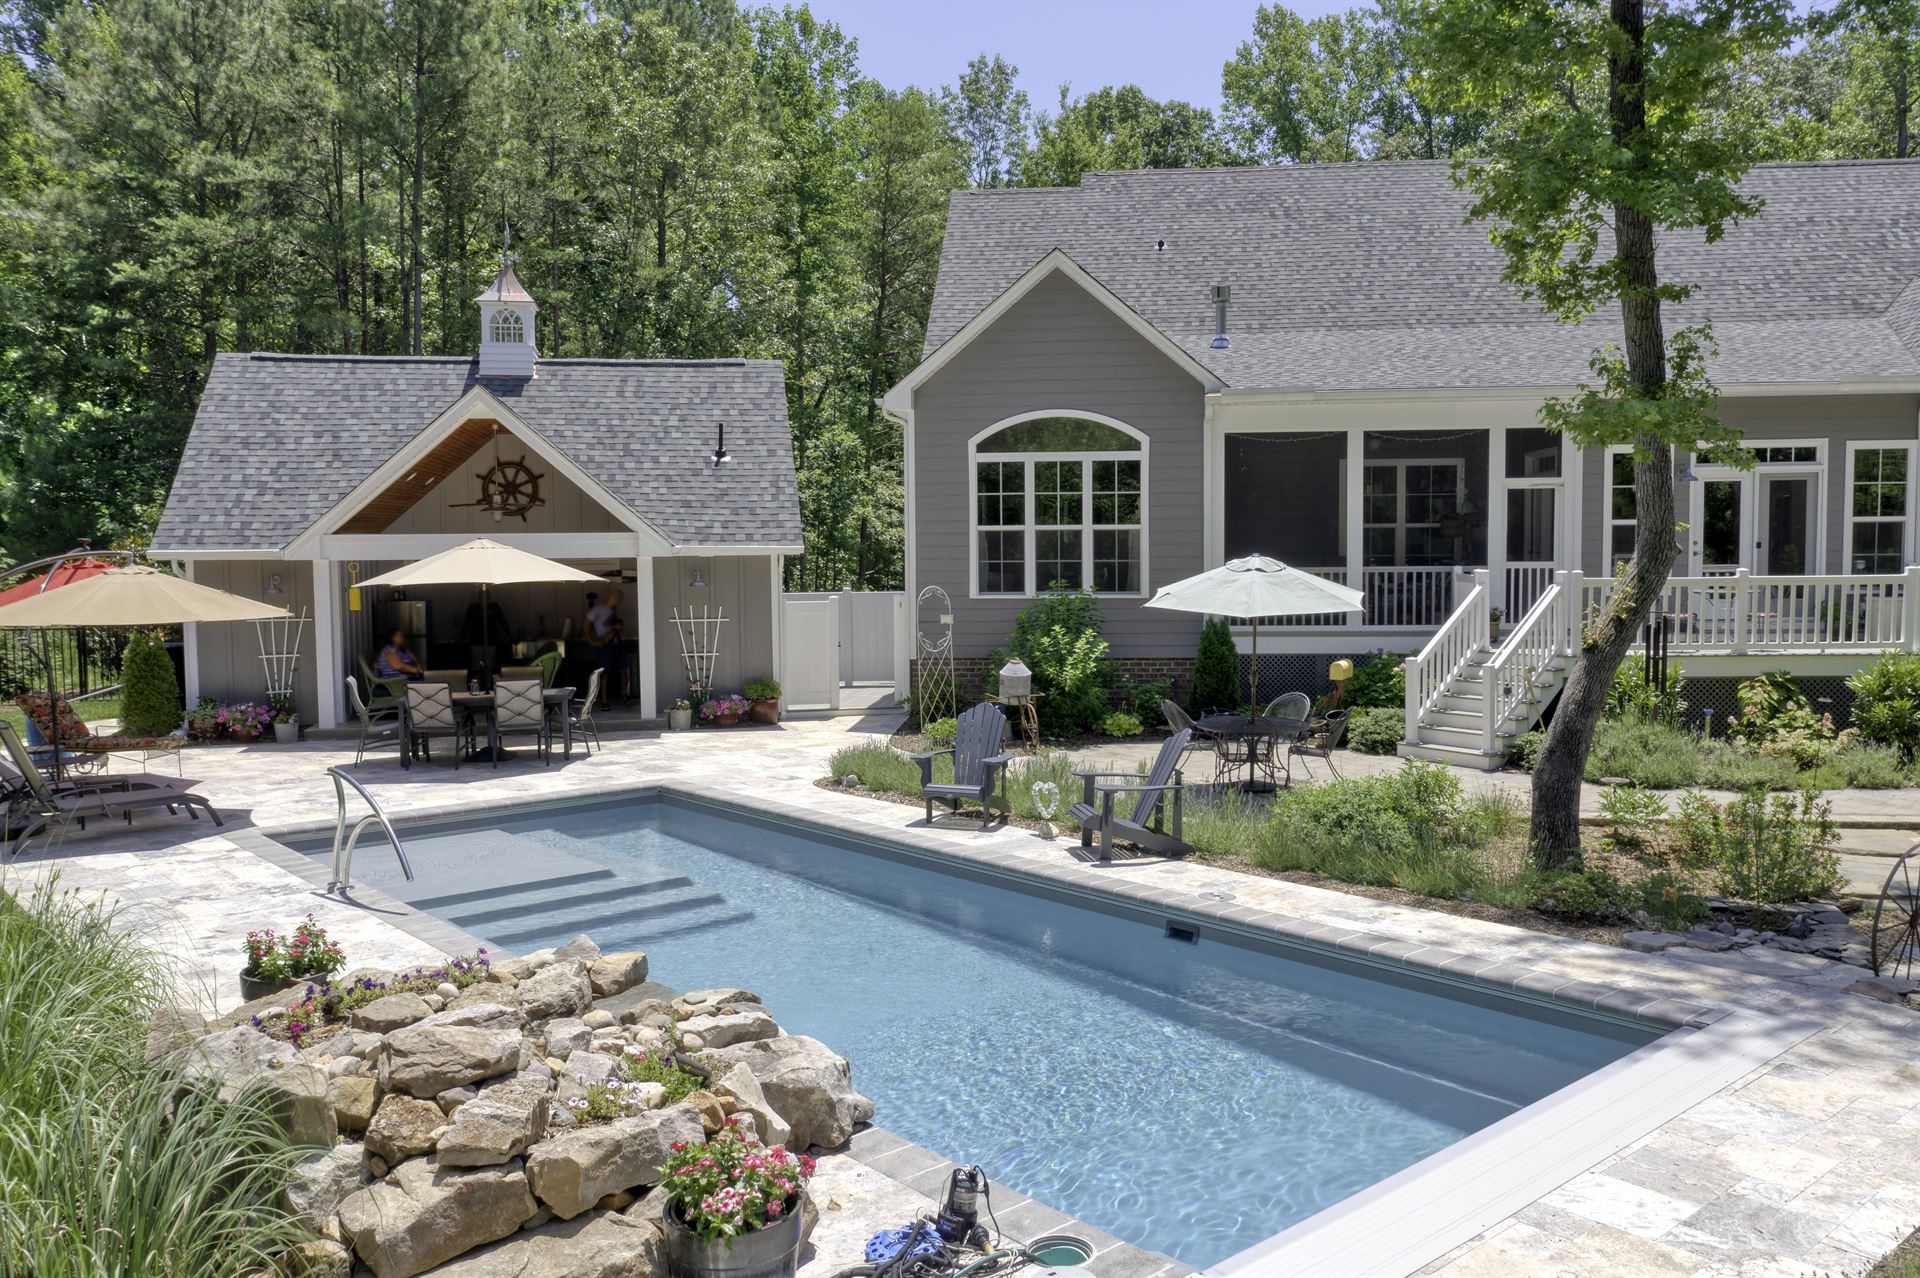 River Pools M35 in Granite Gray with a cascade, natural stone patio, and concrete paver coping